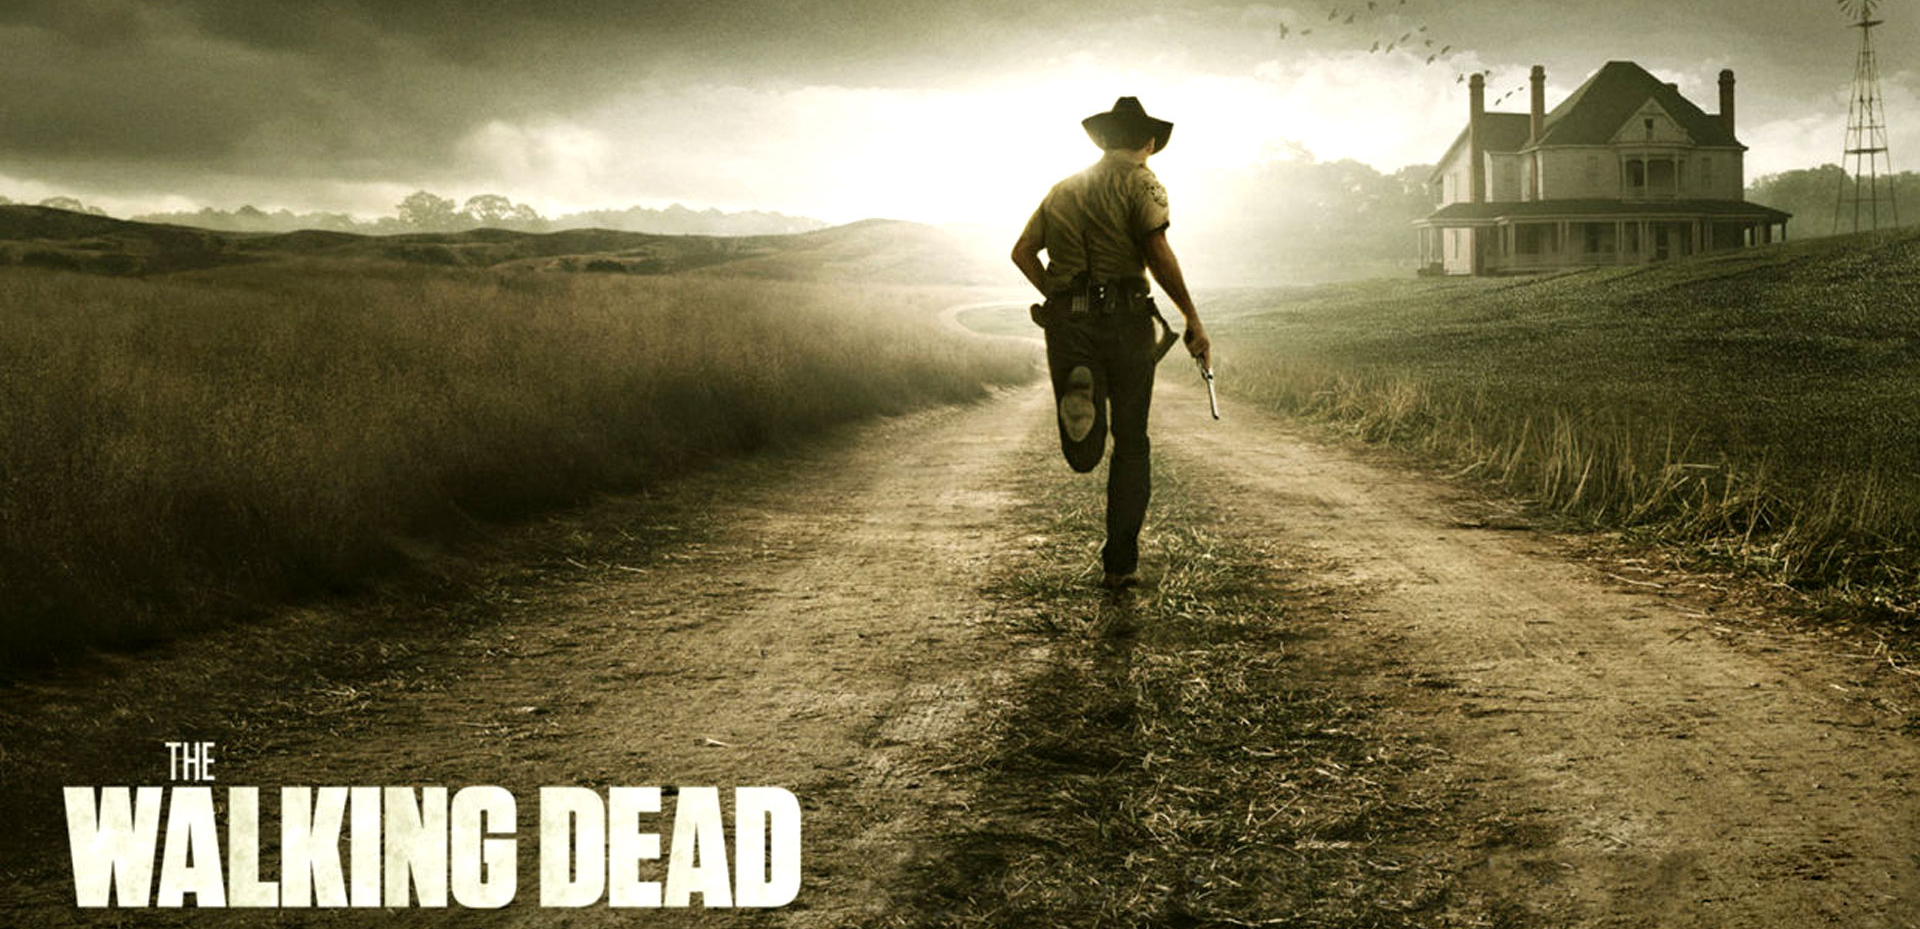 Some Information About The Walking Dead